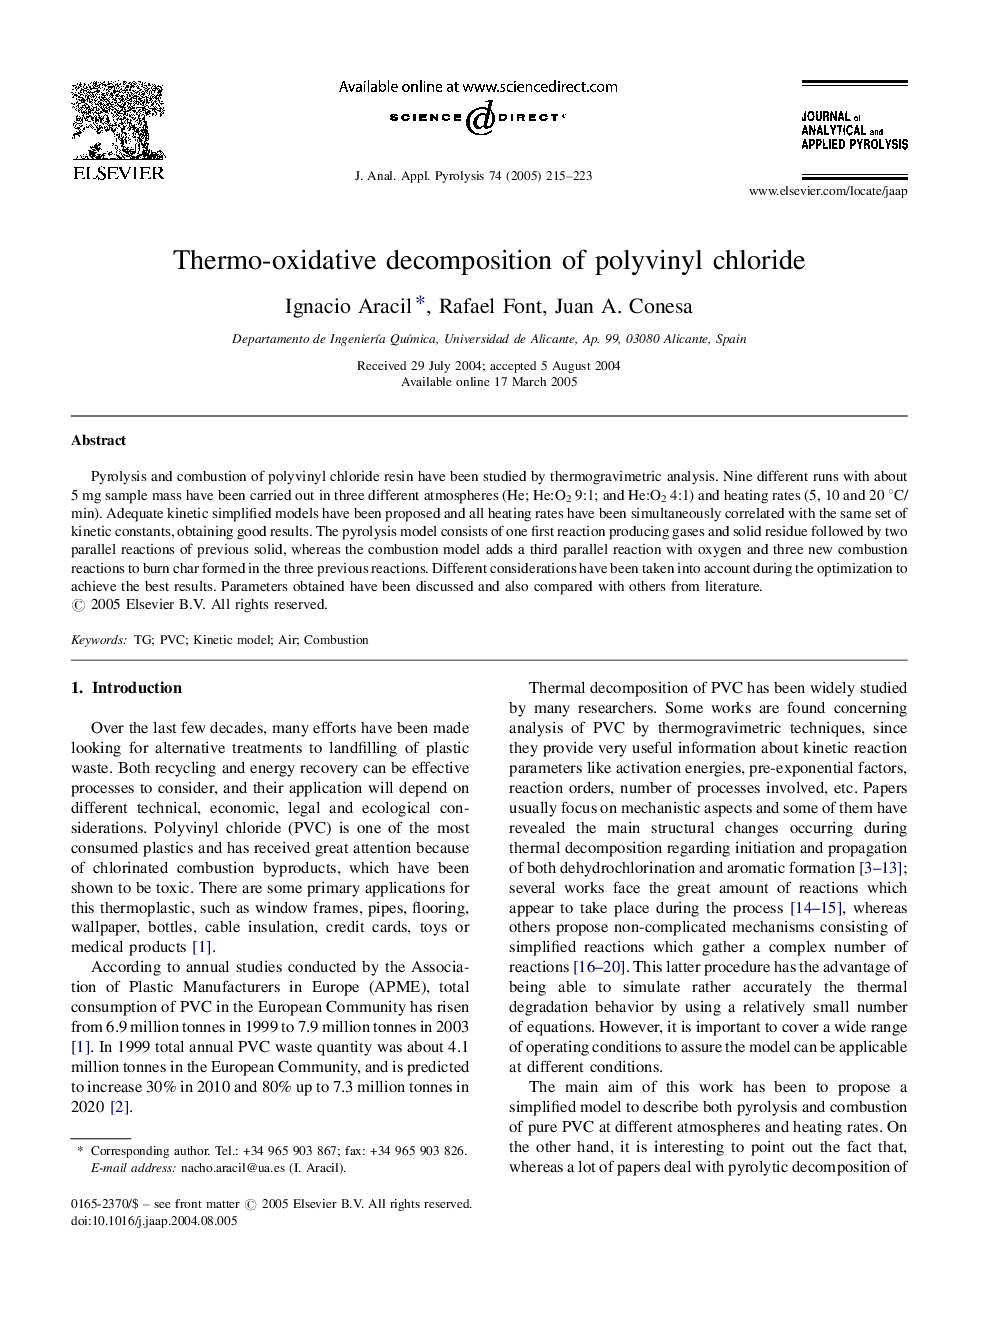 Thermo-oxidative decomposition of polyvinyl chloride